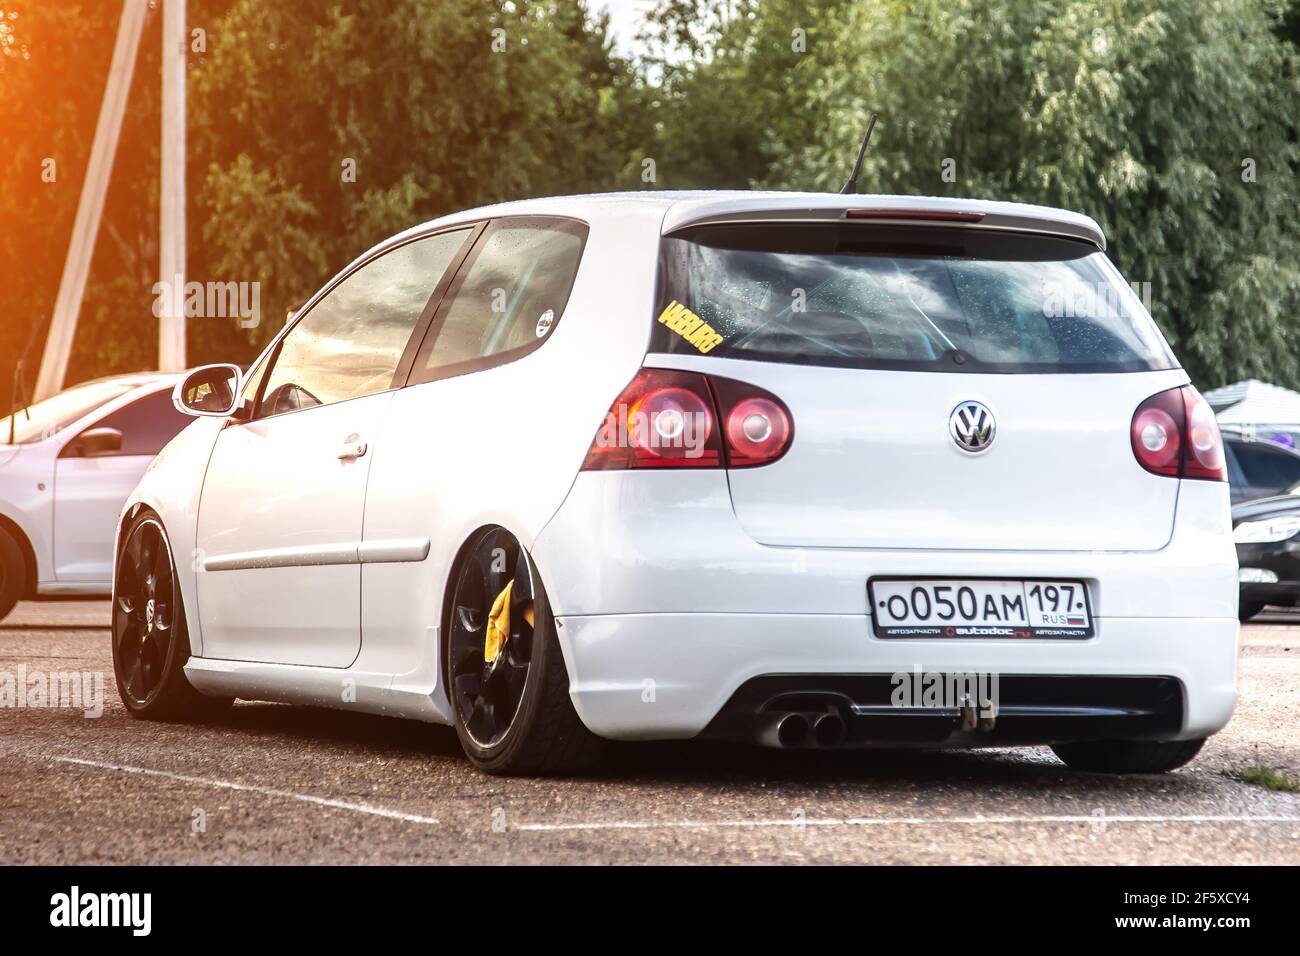 Moscow, Russia - July 06, 2019: White tuned Volkswagen Golf MK5